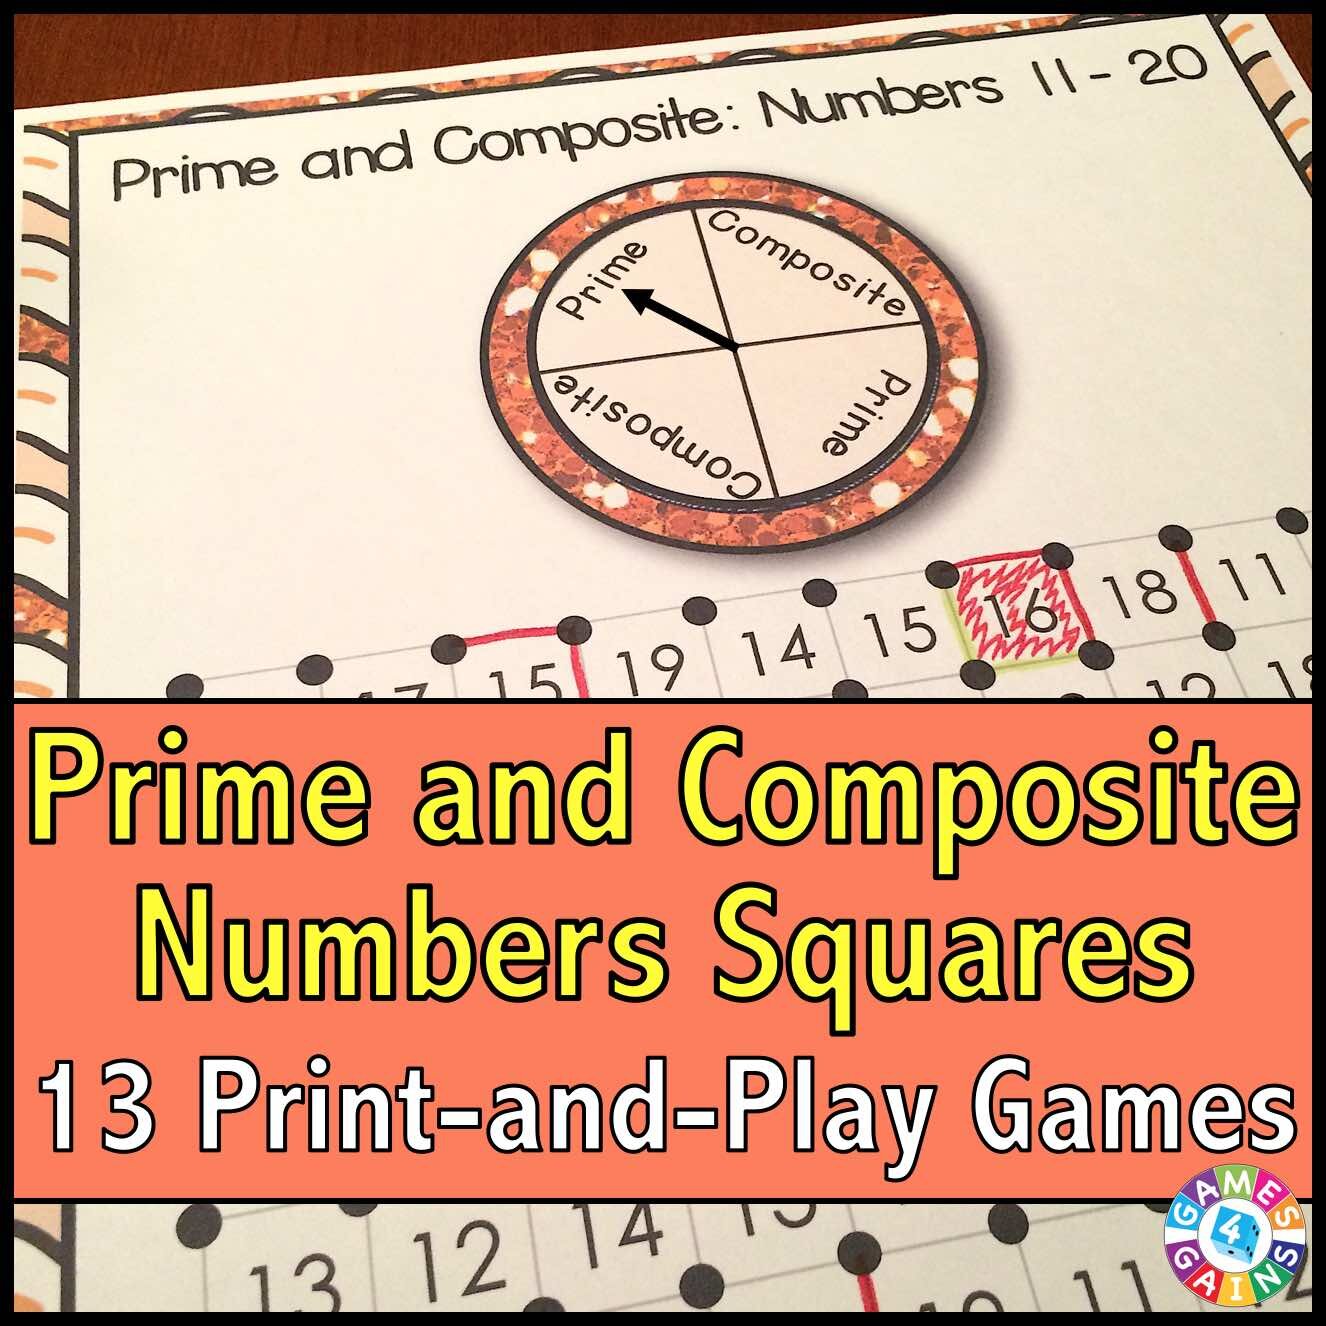 Prime and Composite Numbers Cover.jpg